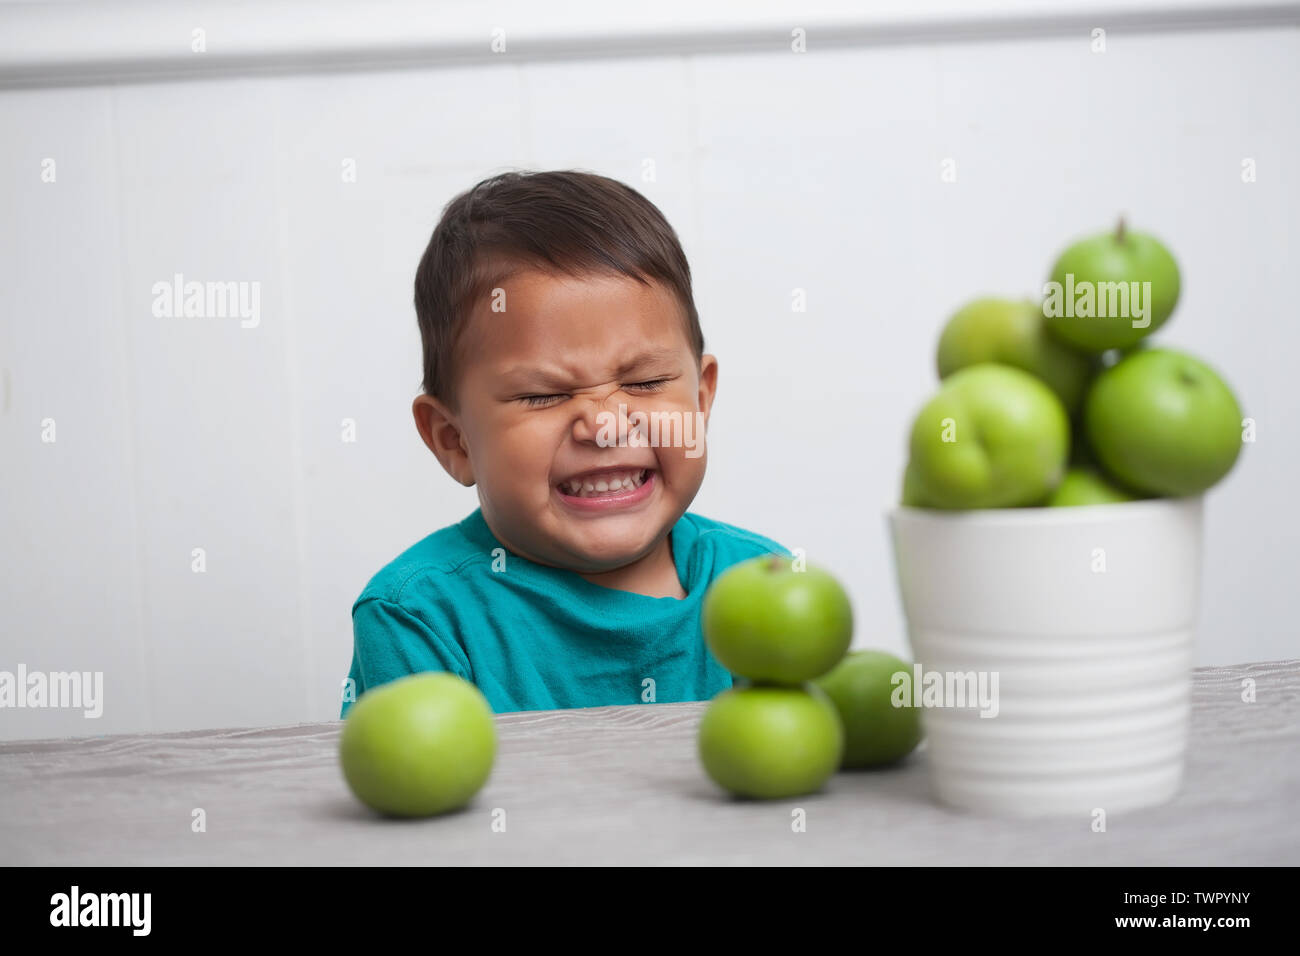 Young boy cheerfully grinning and sitting in front of a bunch of green apples. Stock Photo